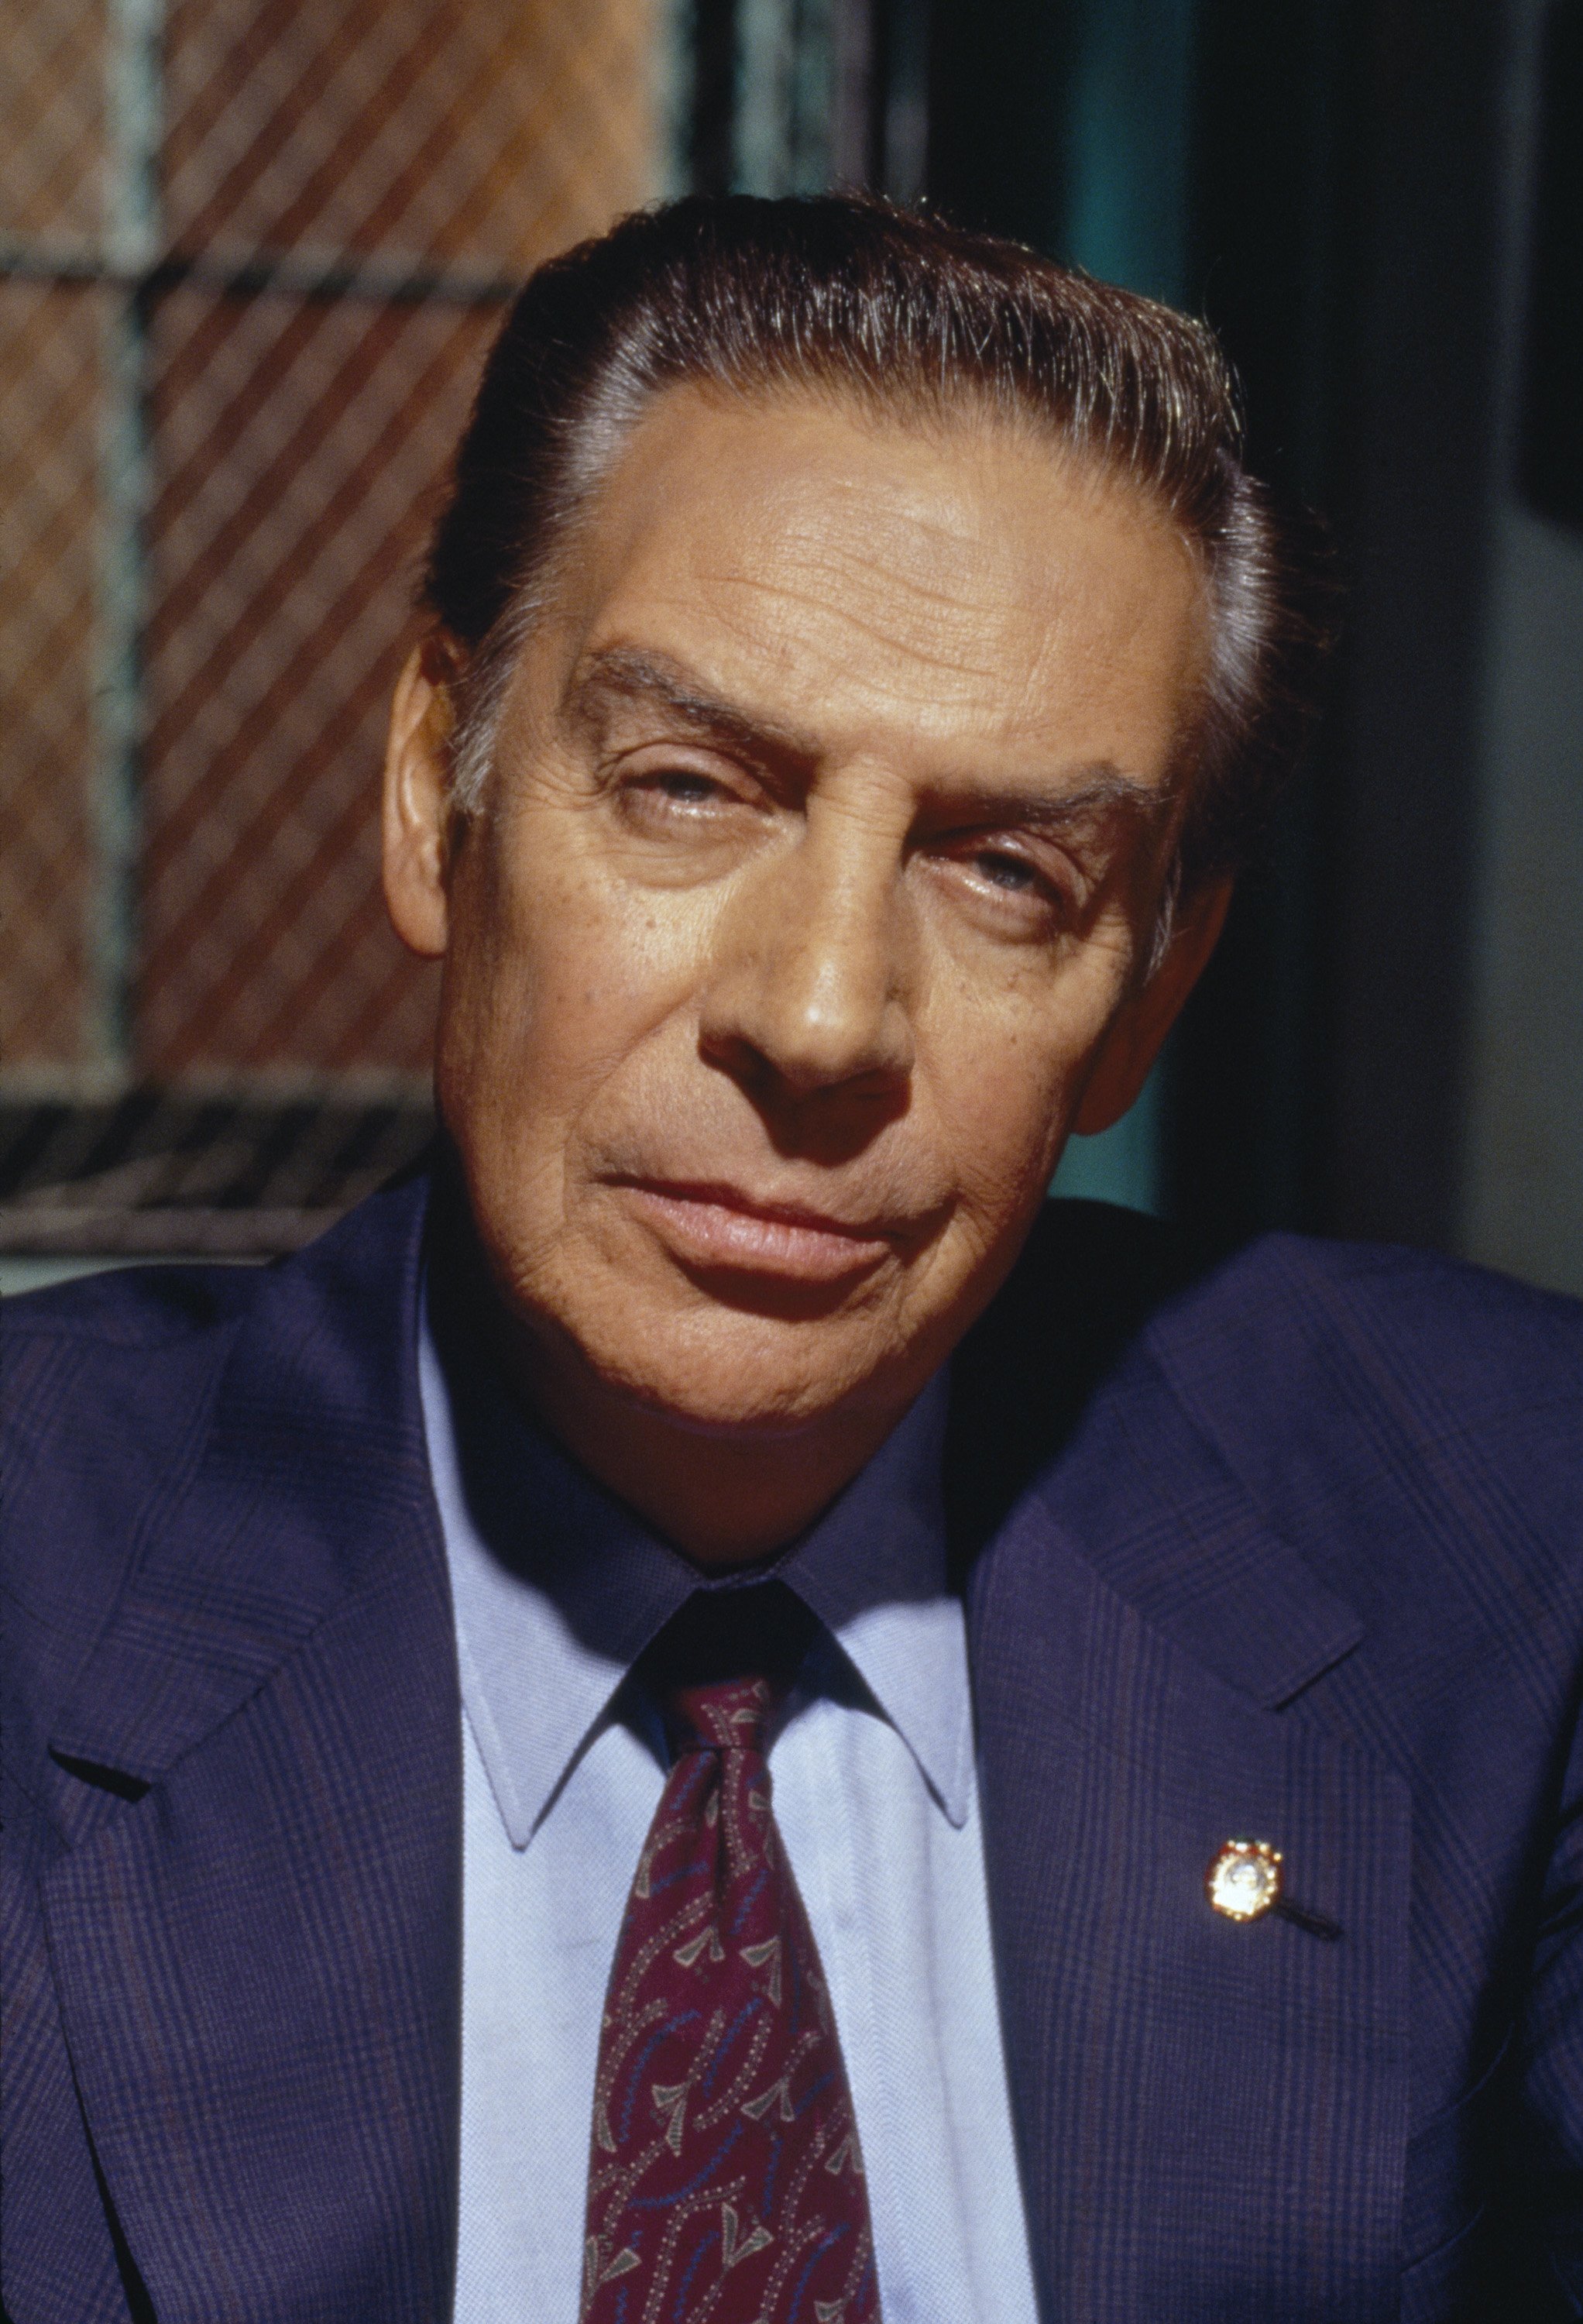 Photo of Jerry Orbach on the set of "Law and Order" | Source: Getty Images